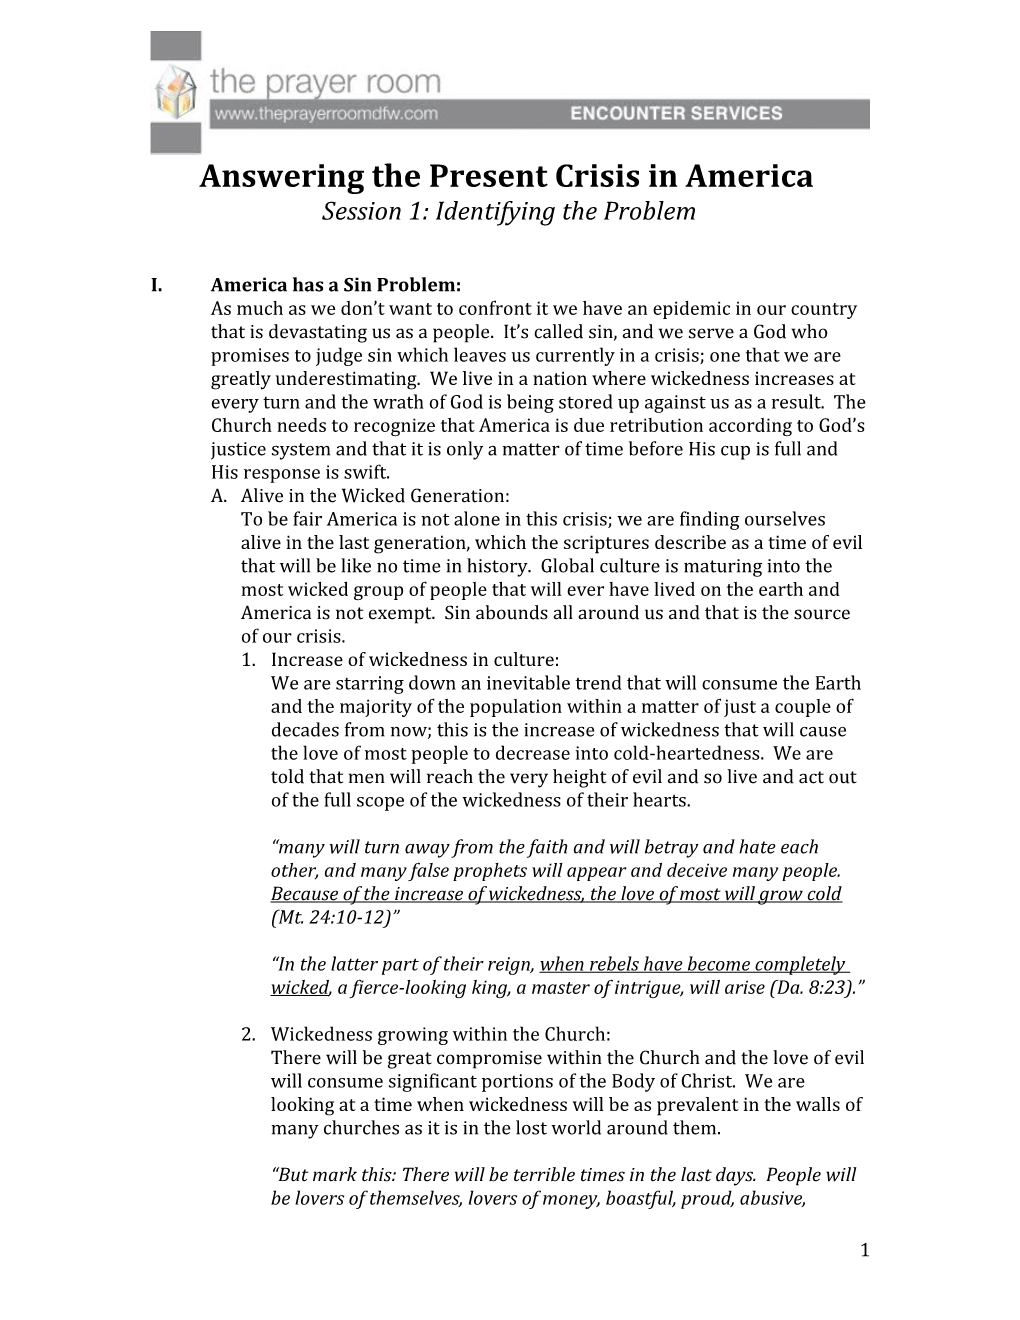 Answering the Present Crisis in America